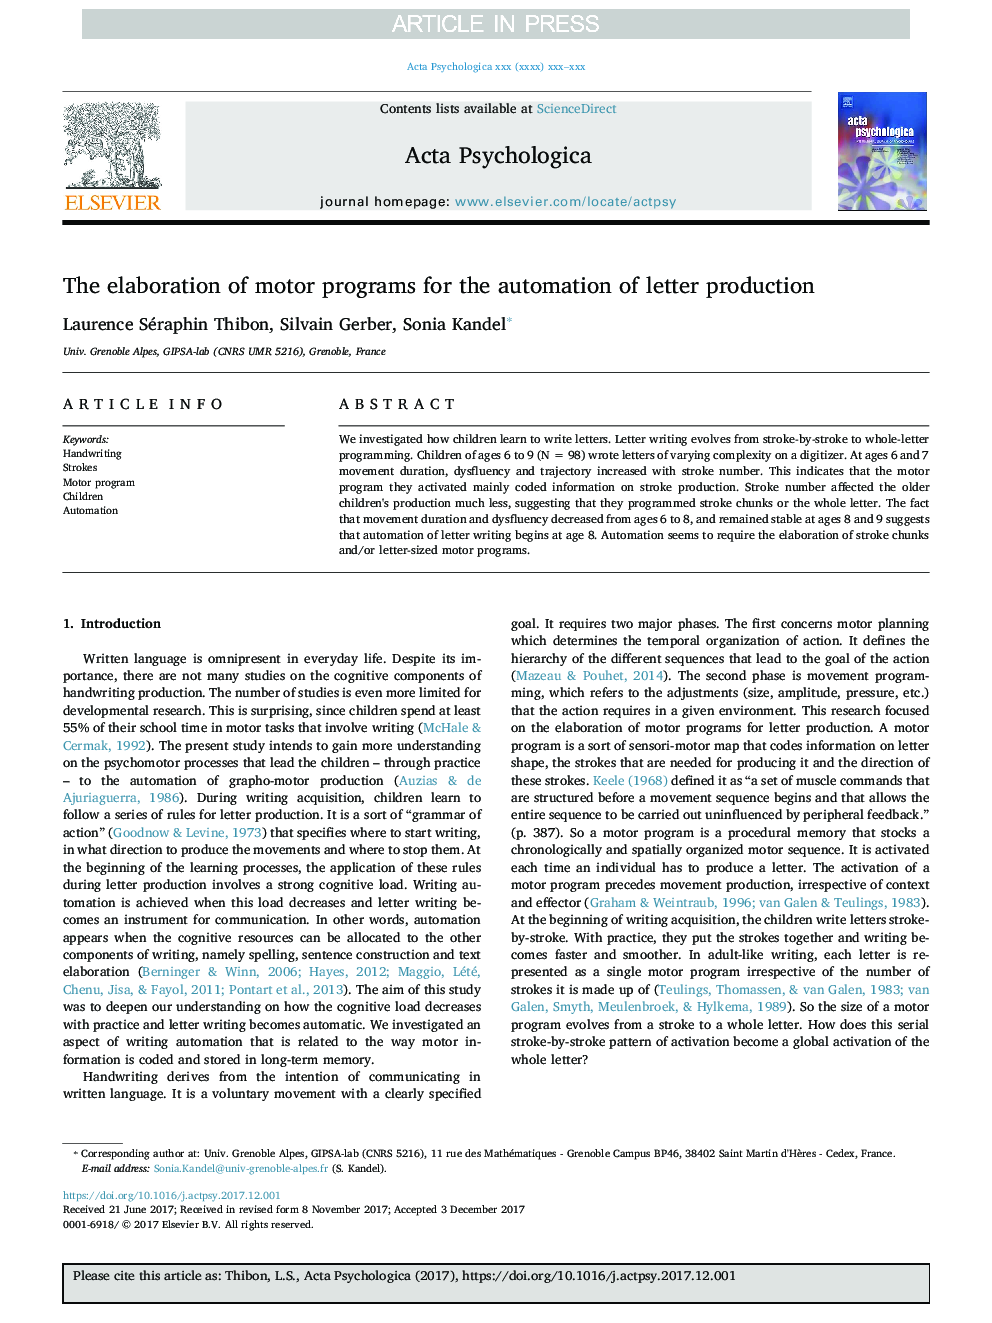 The elaboration of motor programs for the automation of letter production